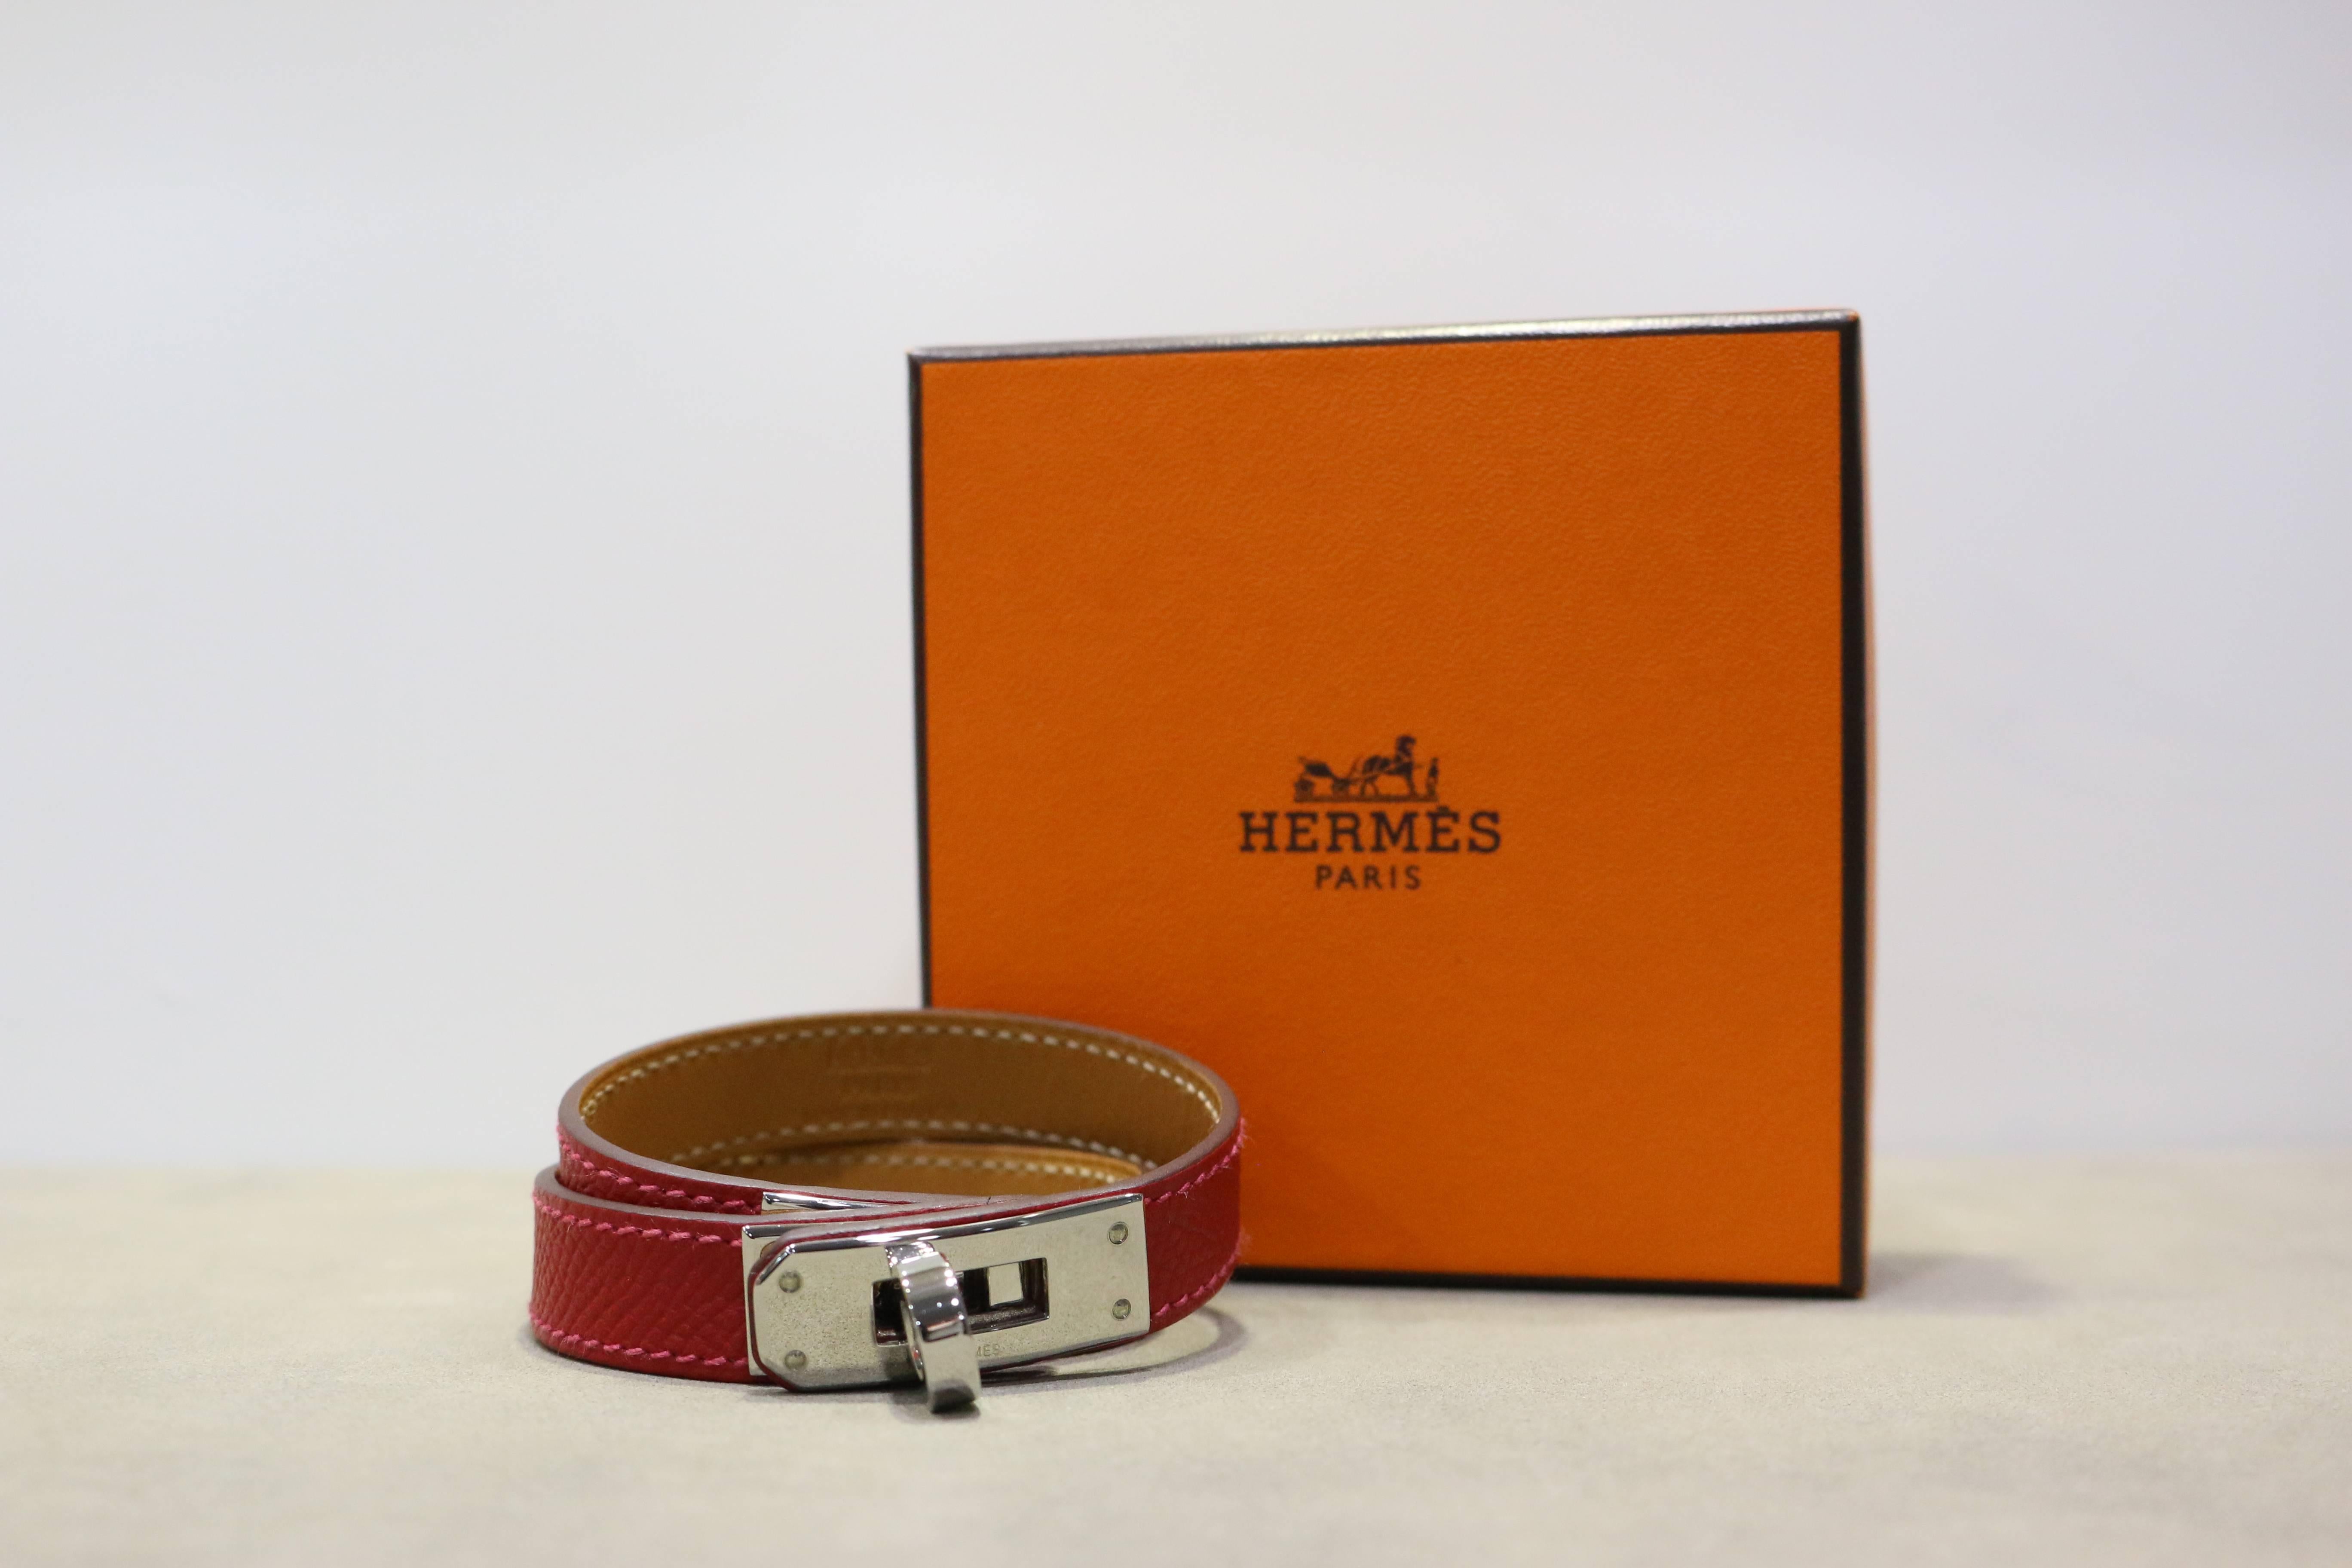 - Authentic and brand new Hermes red Kelly double tour leather bracelet in silver toned hardware. It is a classic leather bracelet with a sense of chicness! 

- Made in France. 

- Measurement: 37.5 cm 

- It comes with dust bag and original box. 